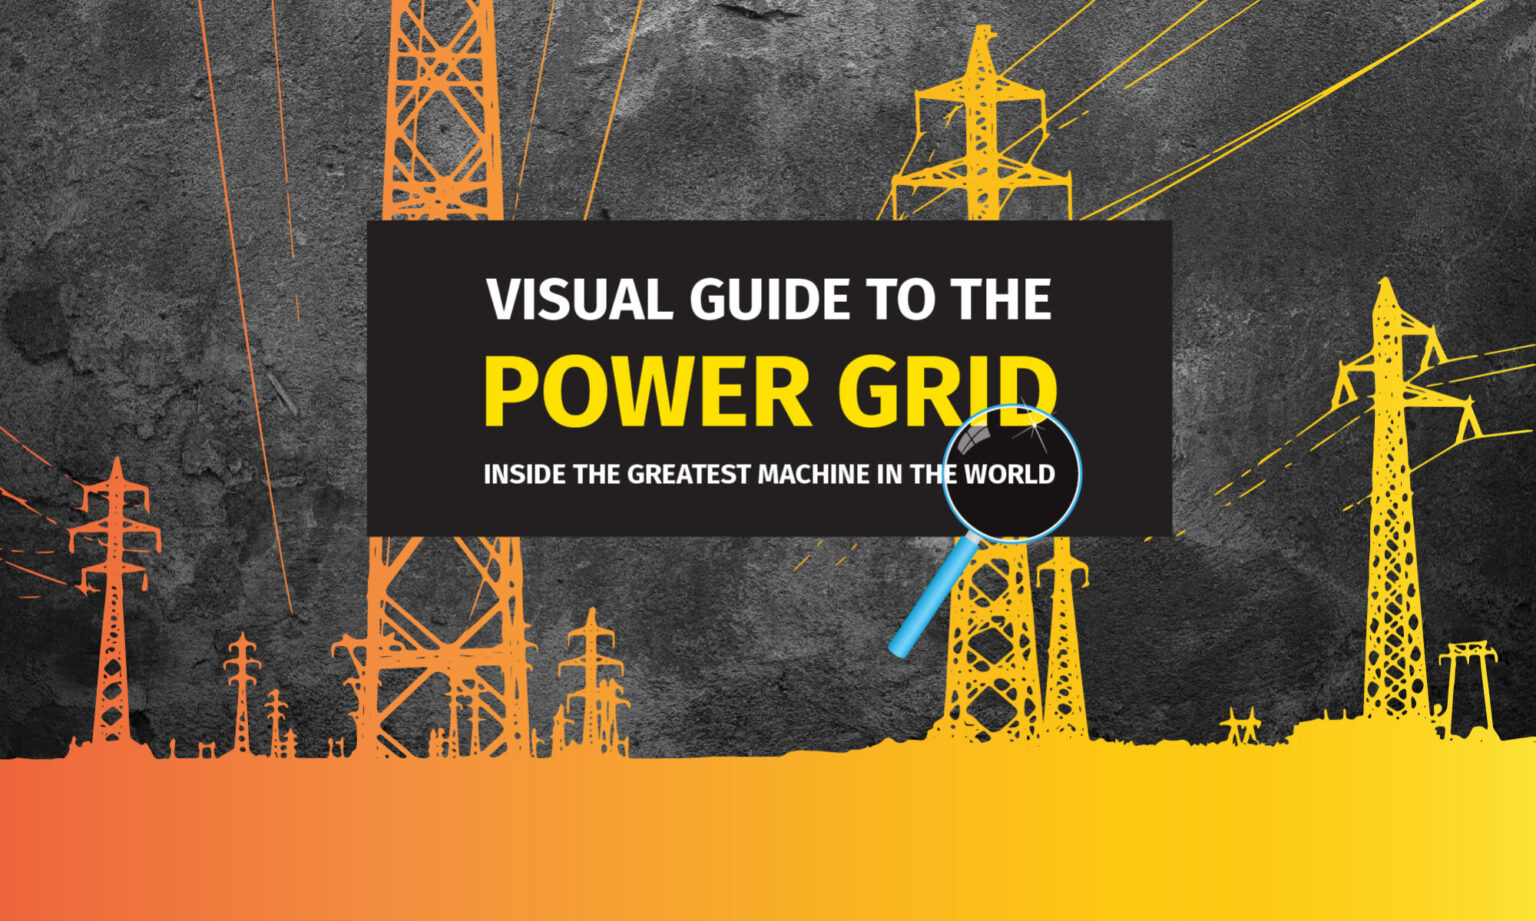 Power grid explained Visual guide to the power grid